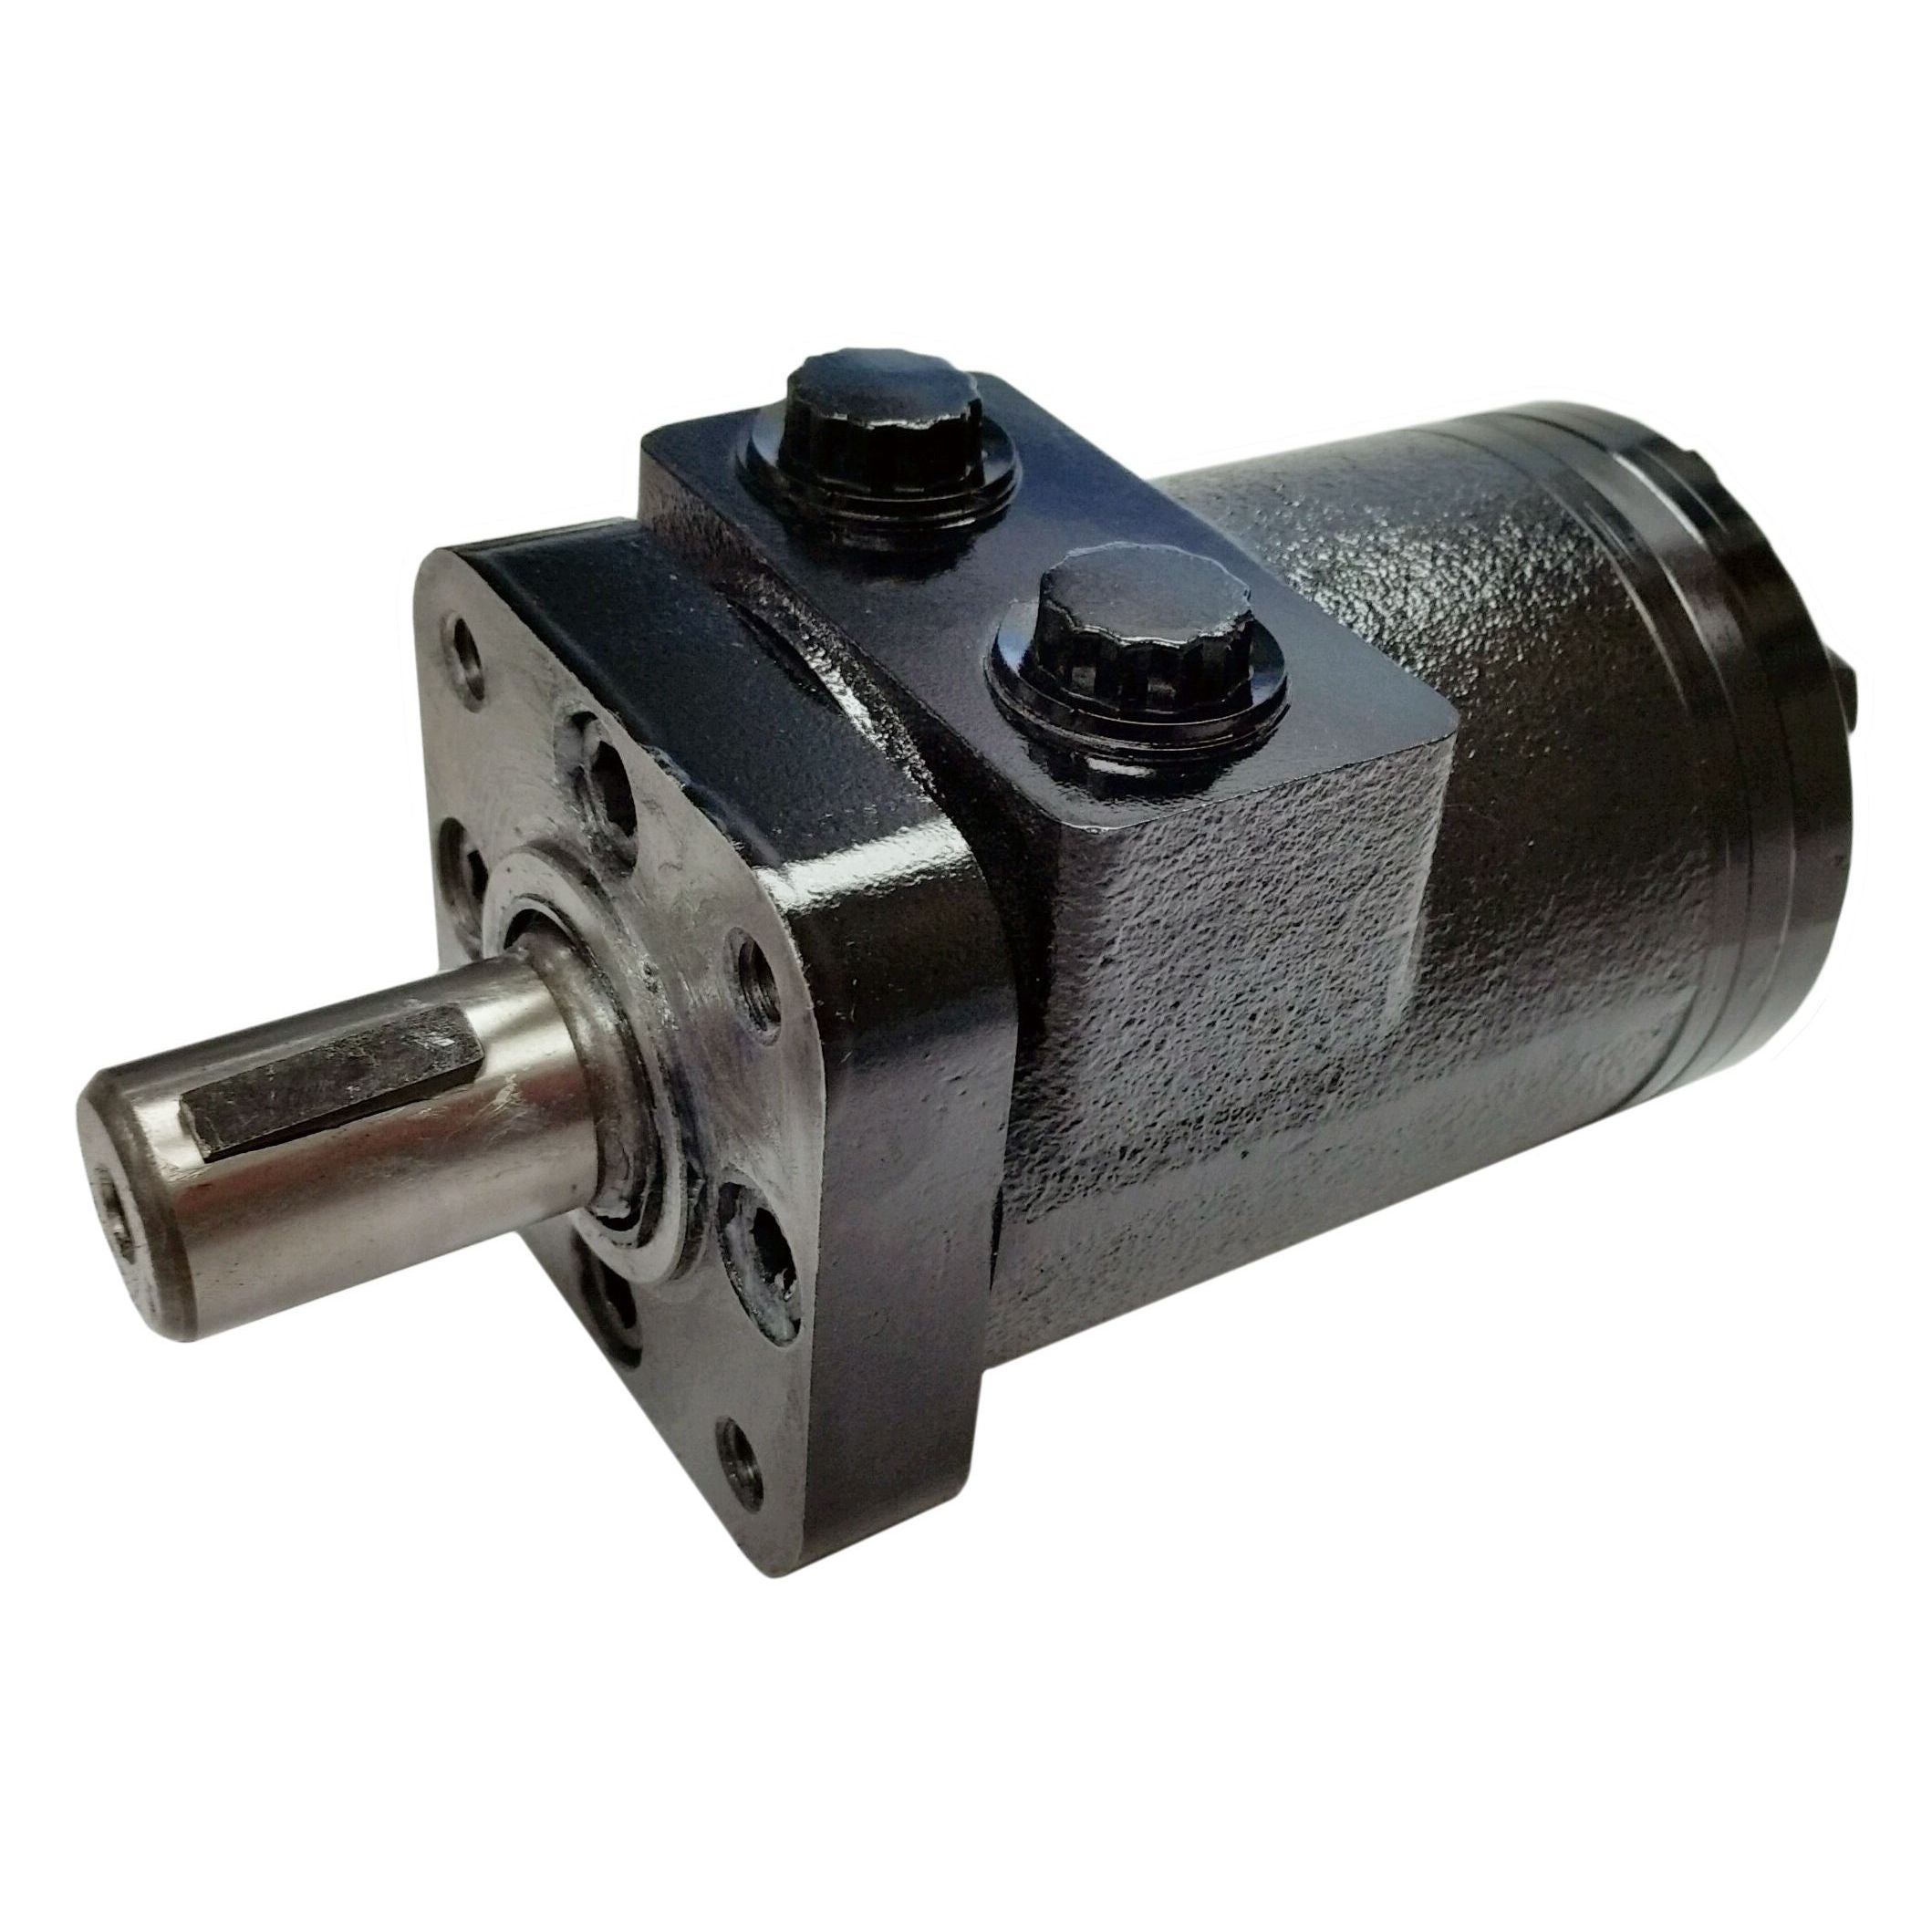 BMPH-200-H4-K-P : Dynamic LSHT Motor, 195cc, 310RPM, 3186in-lb, 2031psi Differential, 15.85GPM, SAE A 4-Bolt Mount, 1" Bore x 1/4" Key Shaft, Side Ported, 1/2" NPT